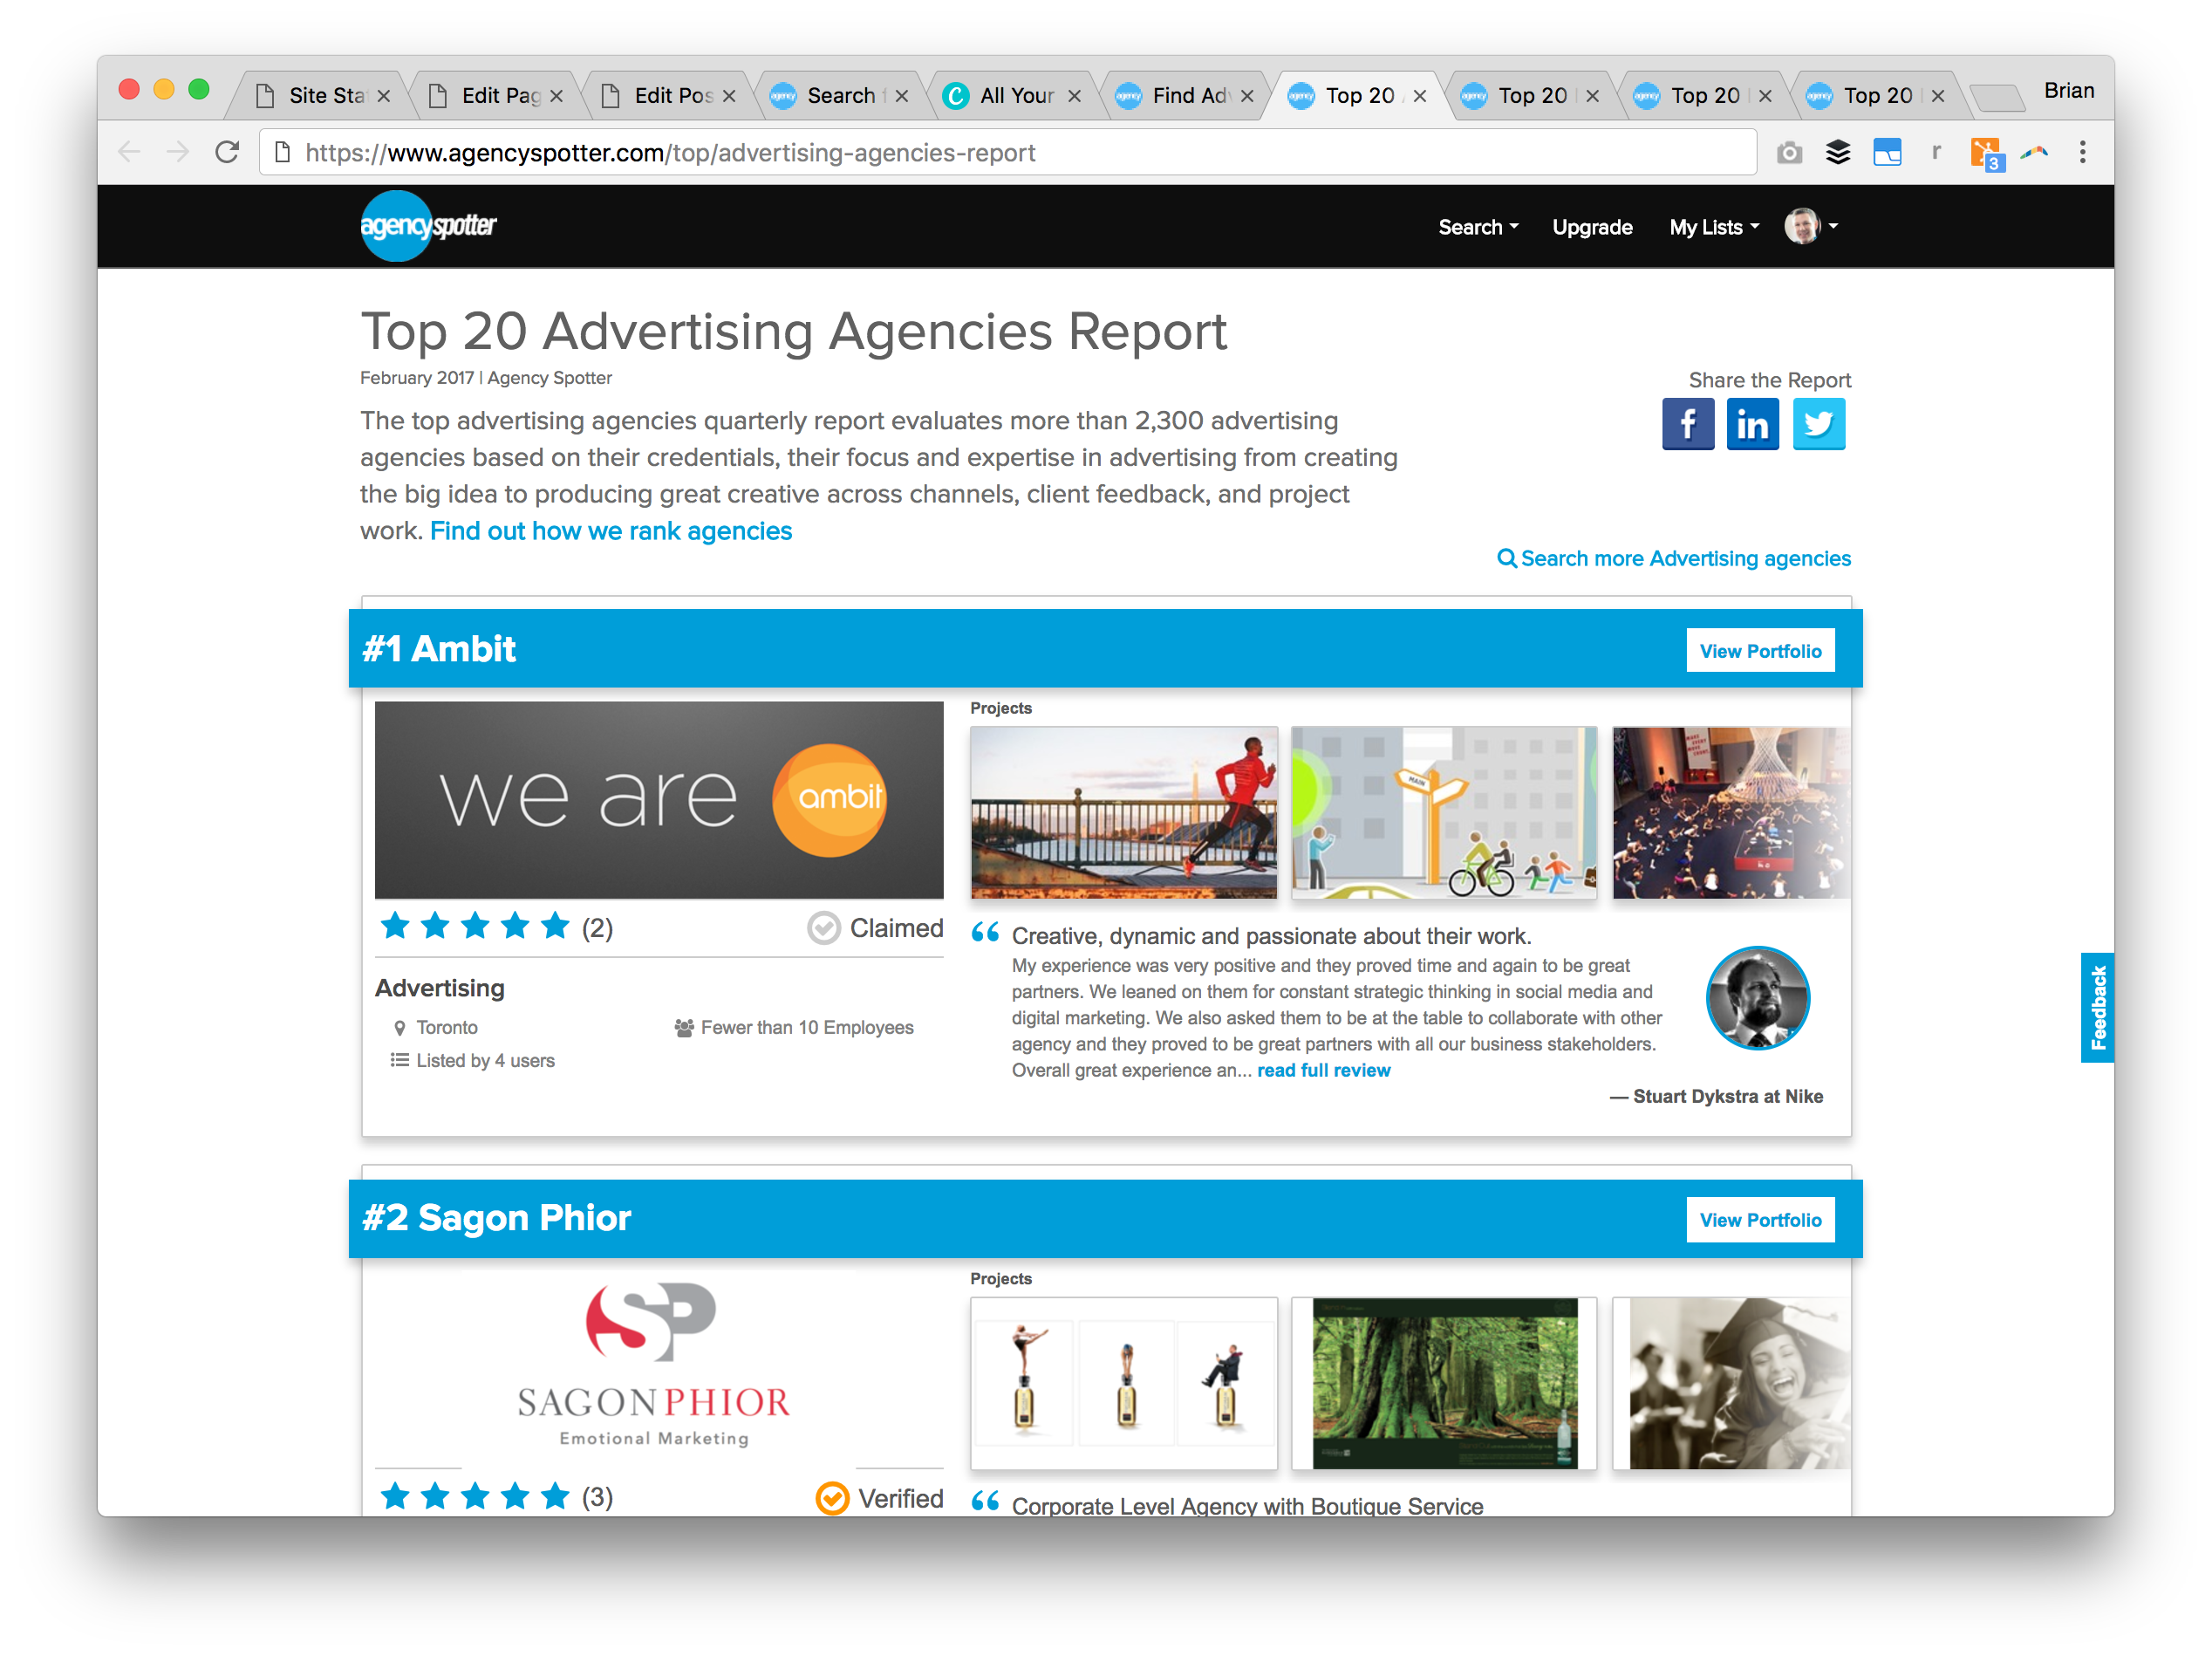 Preview: Top Advertising Agencies Report February 2017